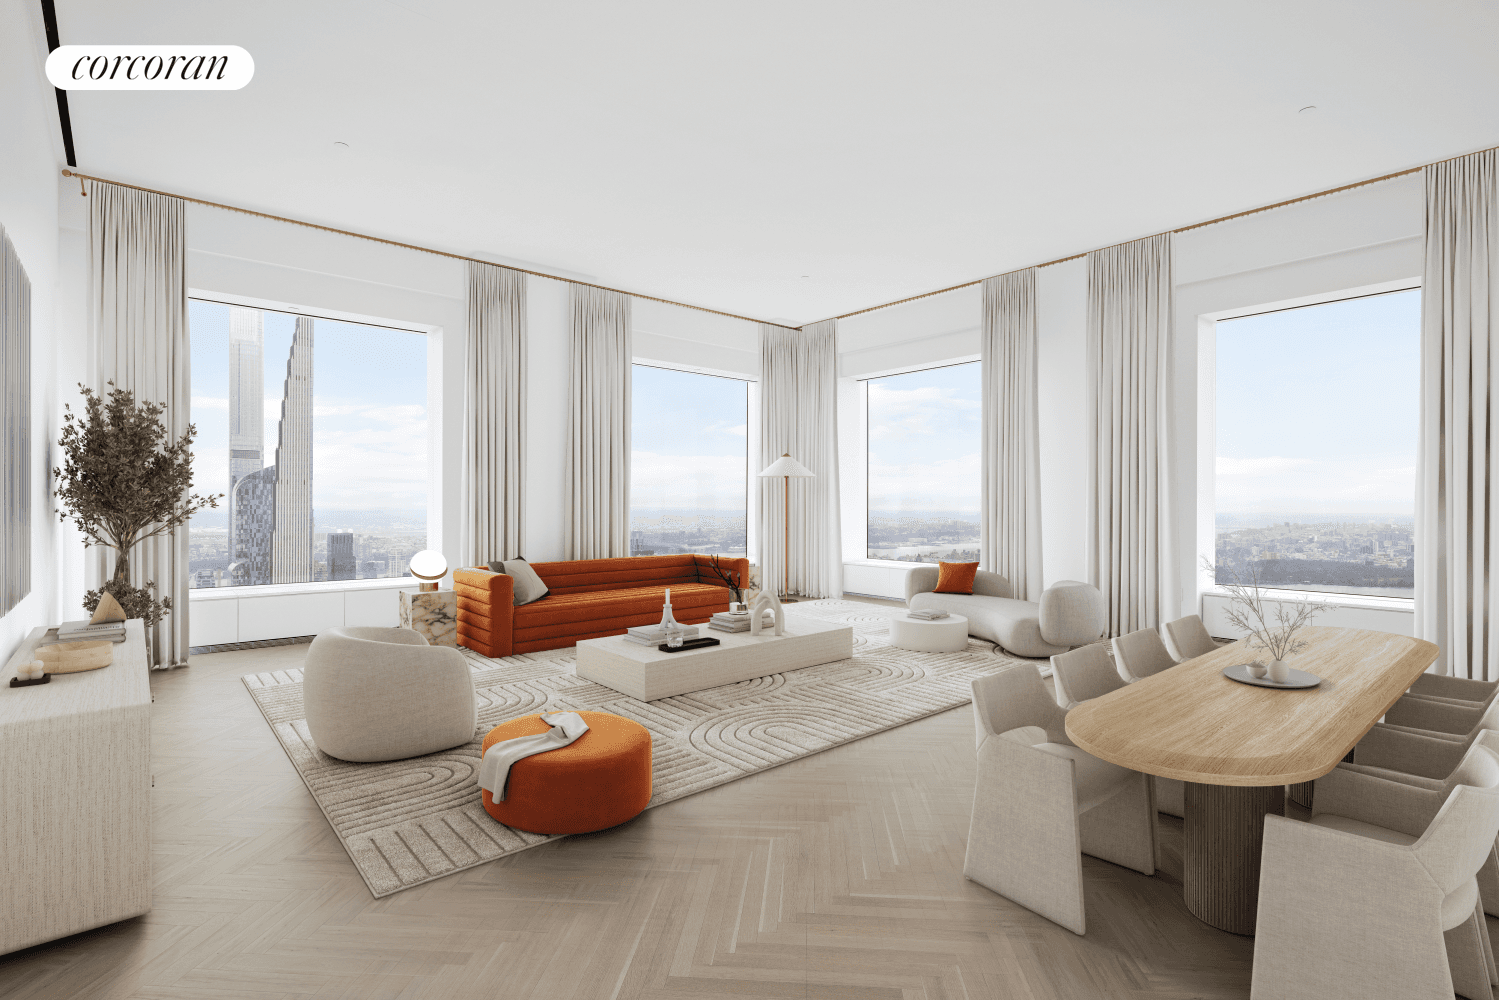 Residence 71B at 432 Park AvenueThree Bedrooms Four Baths Library Powder Room 4, 054 sqftResidence 71B at 432 Park Avenue is an impeccable half floor residence featuring a perfect balance ...